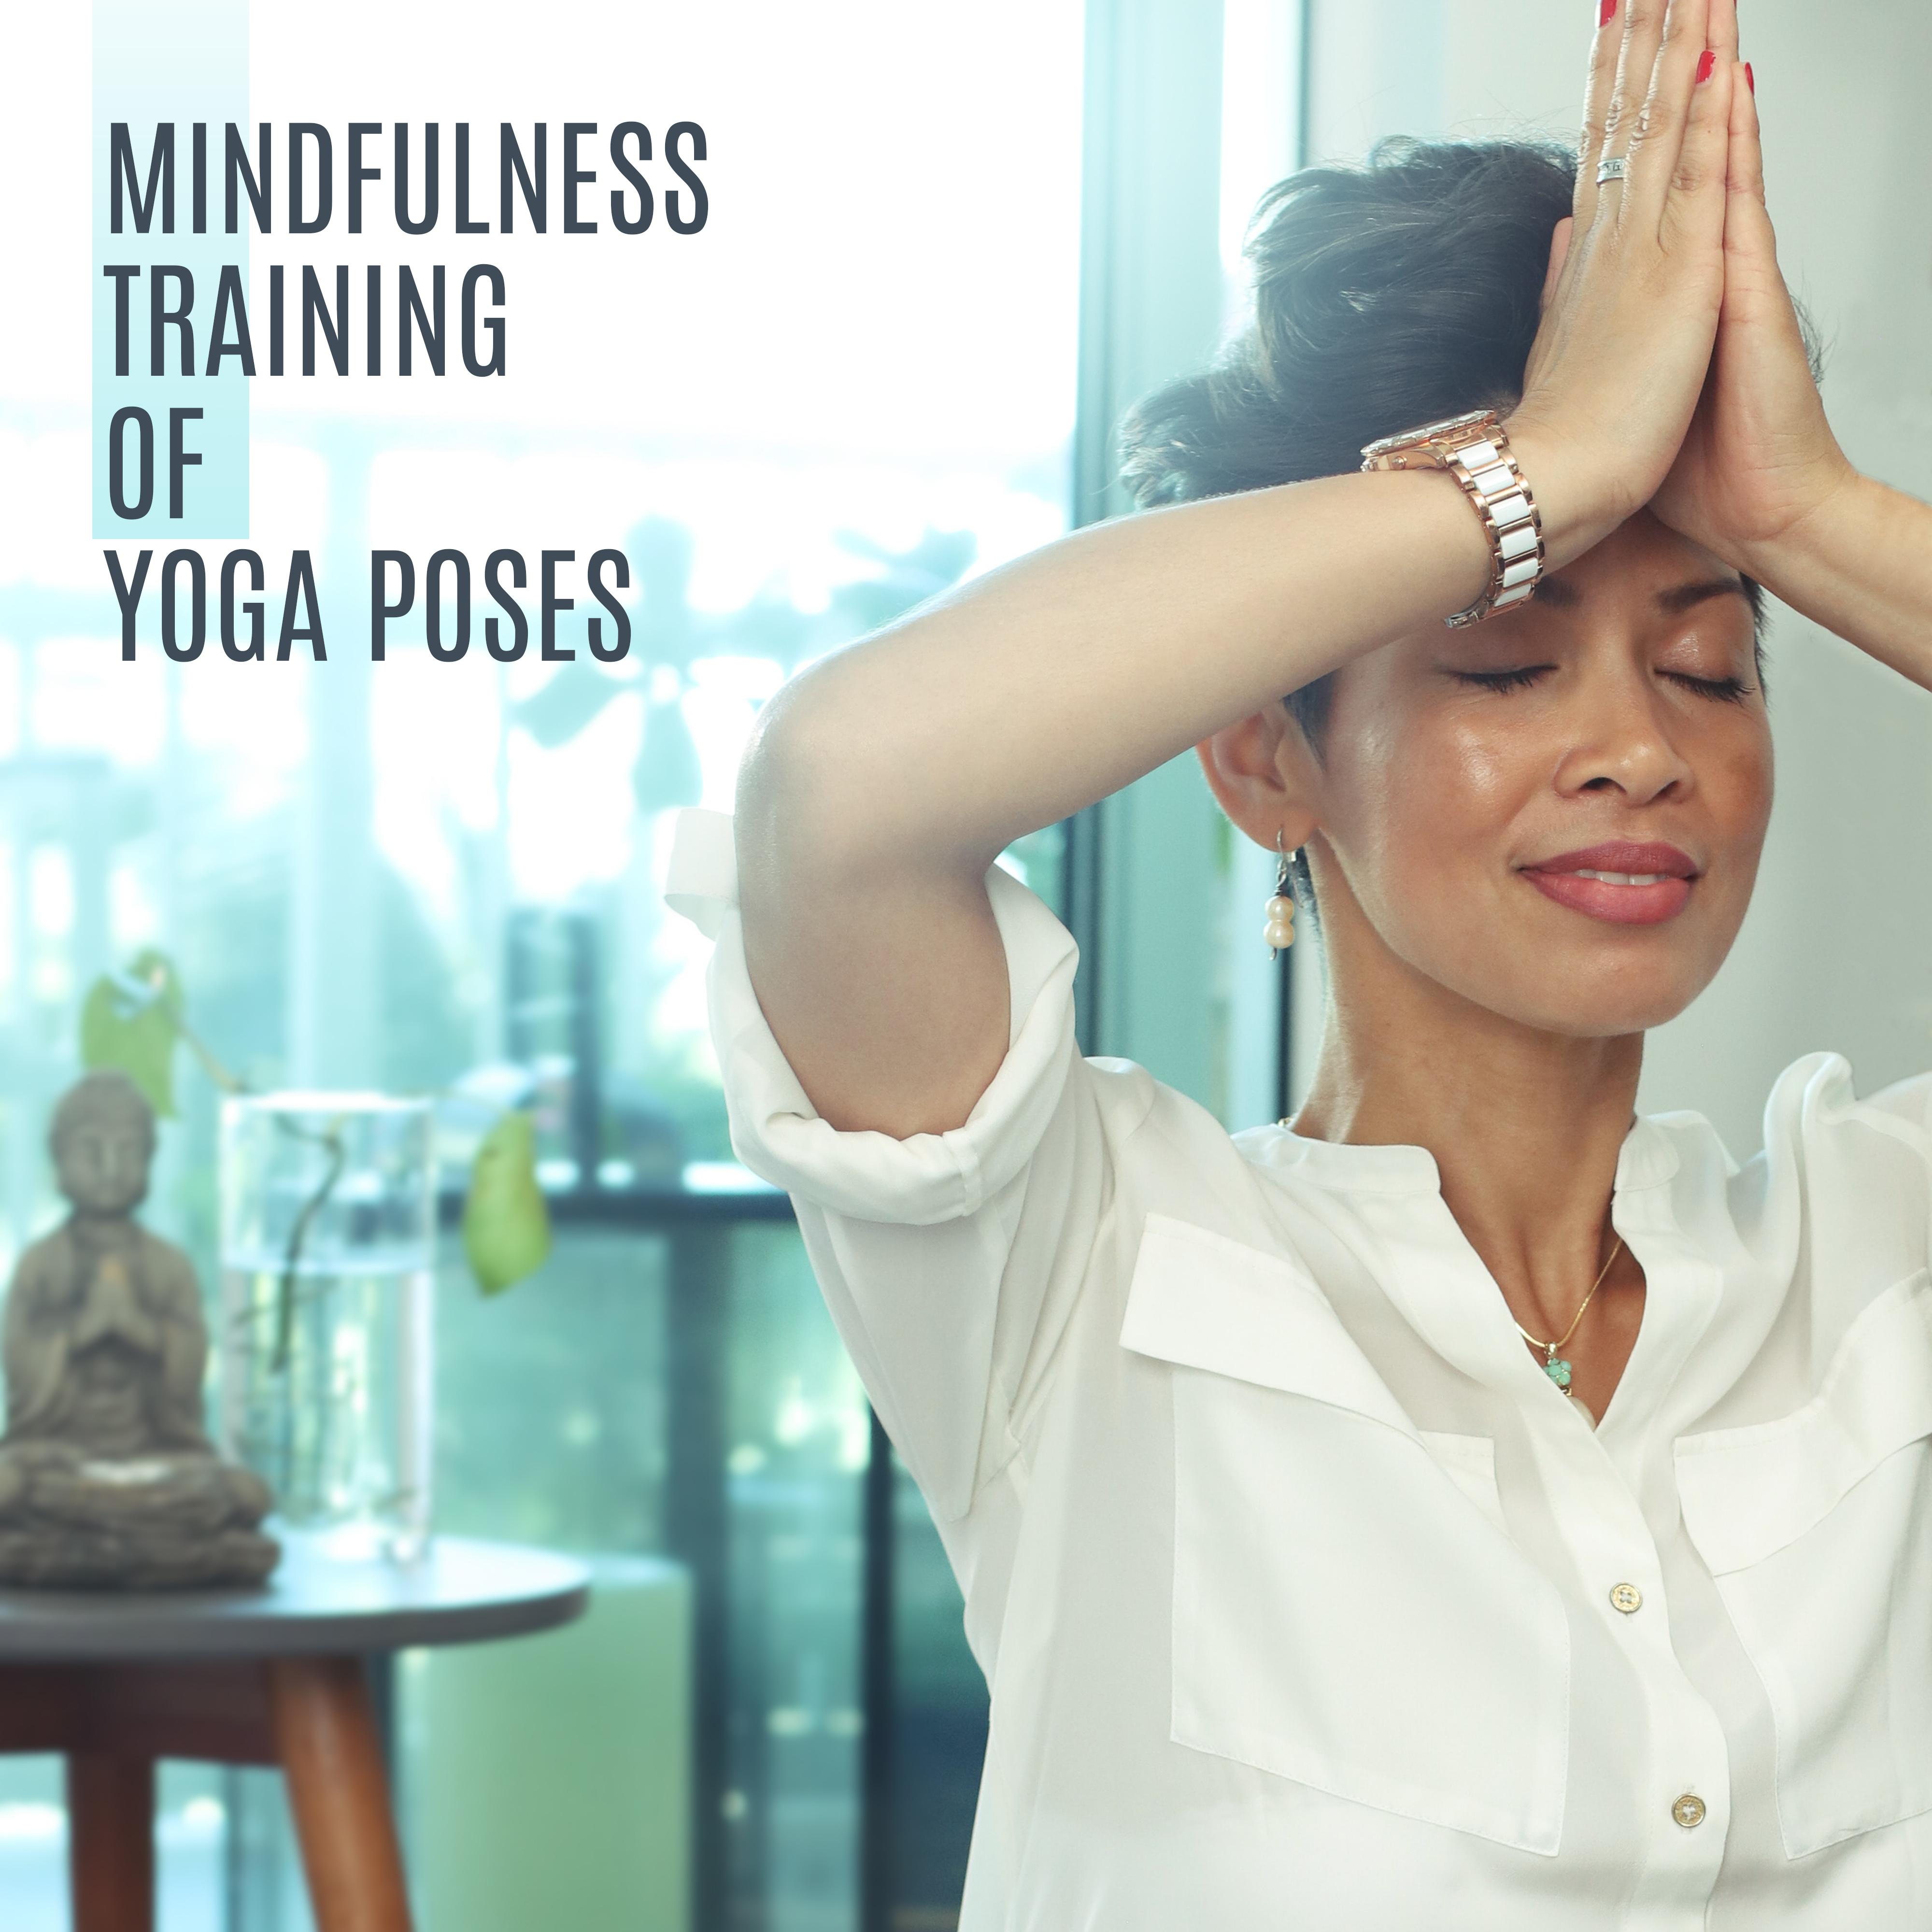 Mindfulness Training of Yoga Poses: Collection of 15 Fresh 2019 New Age Songs for Deep Meditation & Relaxation, Balancing Chakra, Inner Energy Increase, Body & Soul Connection